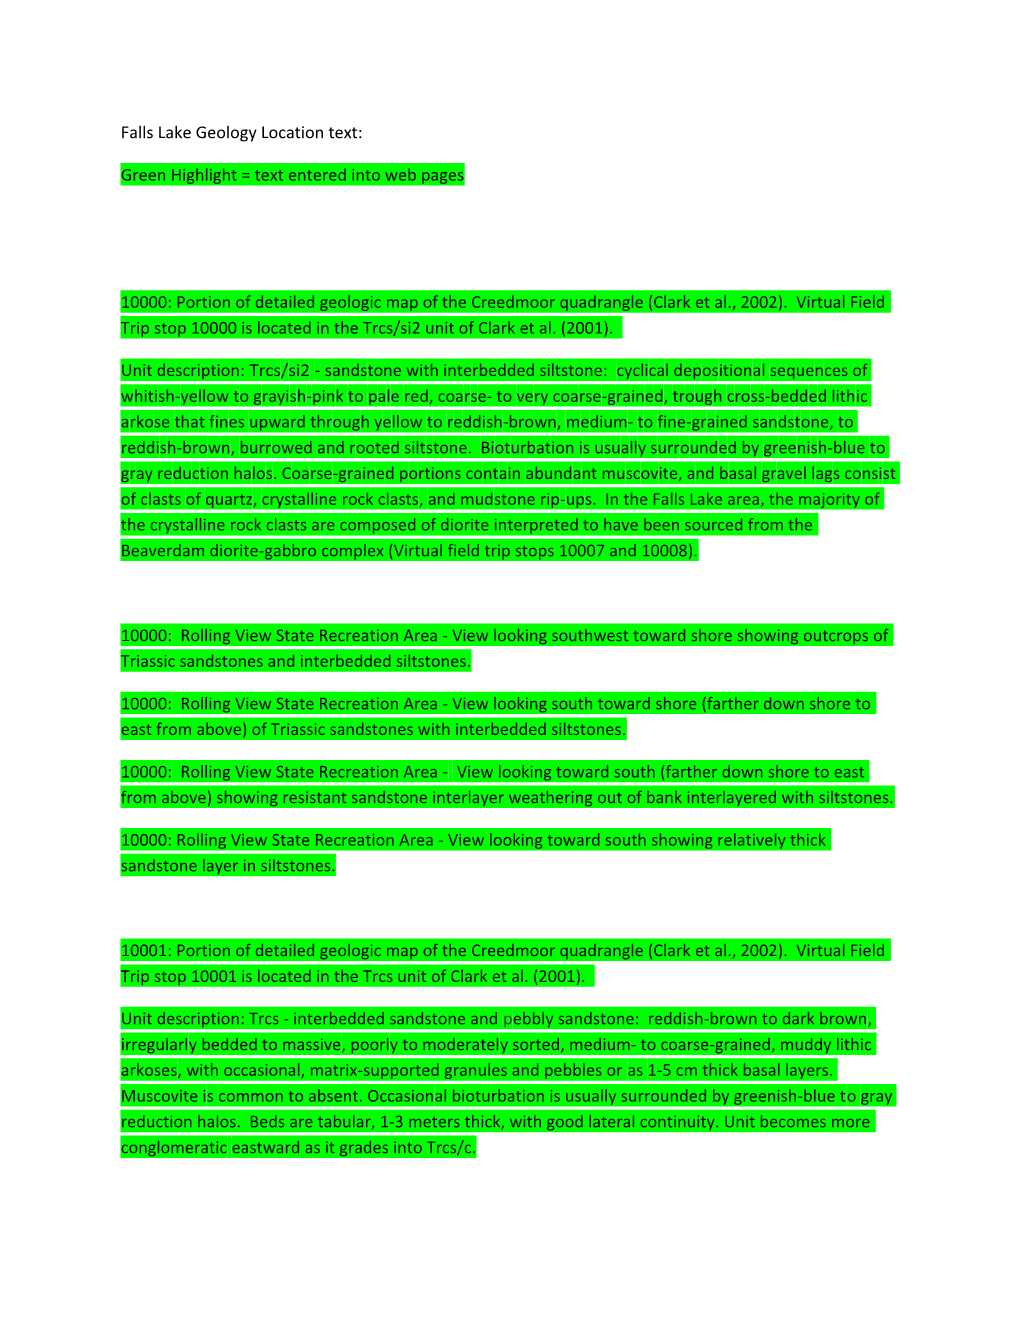 Green Highlight = Text Entered Into Web Pages